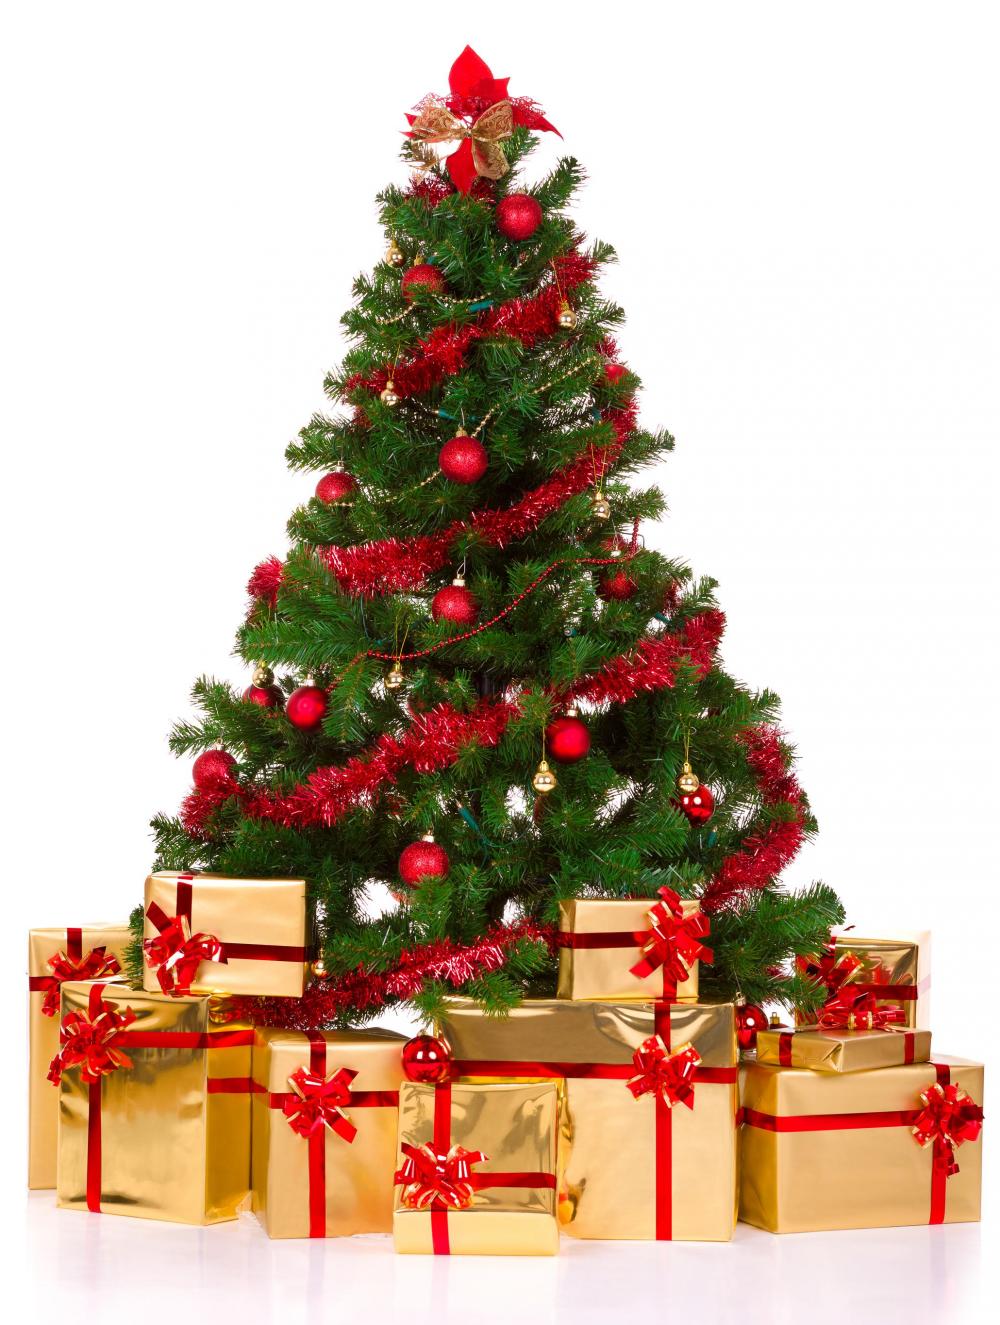 christmas-tree-decorations-with-ribbons-and-gifts